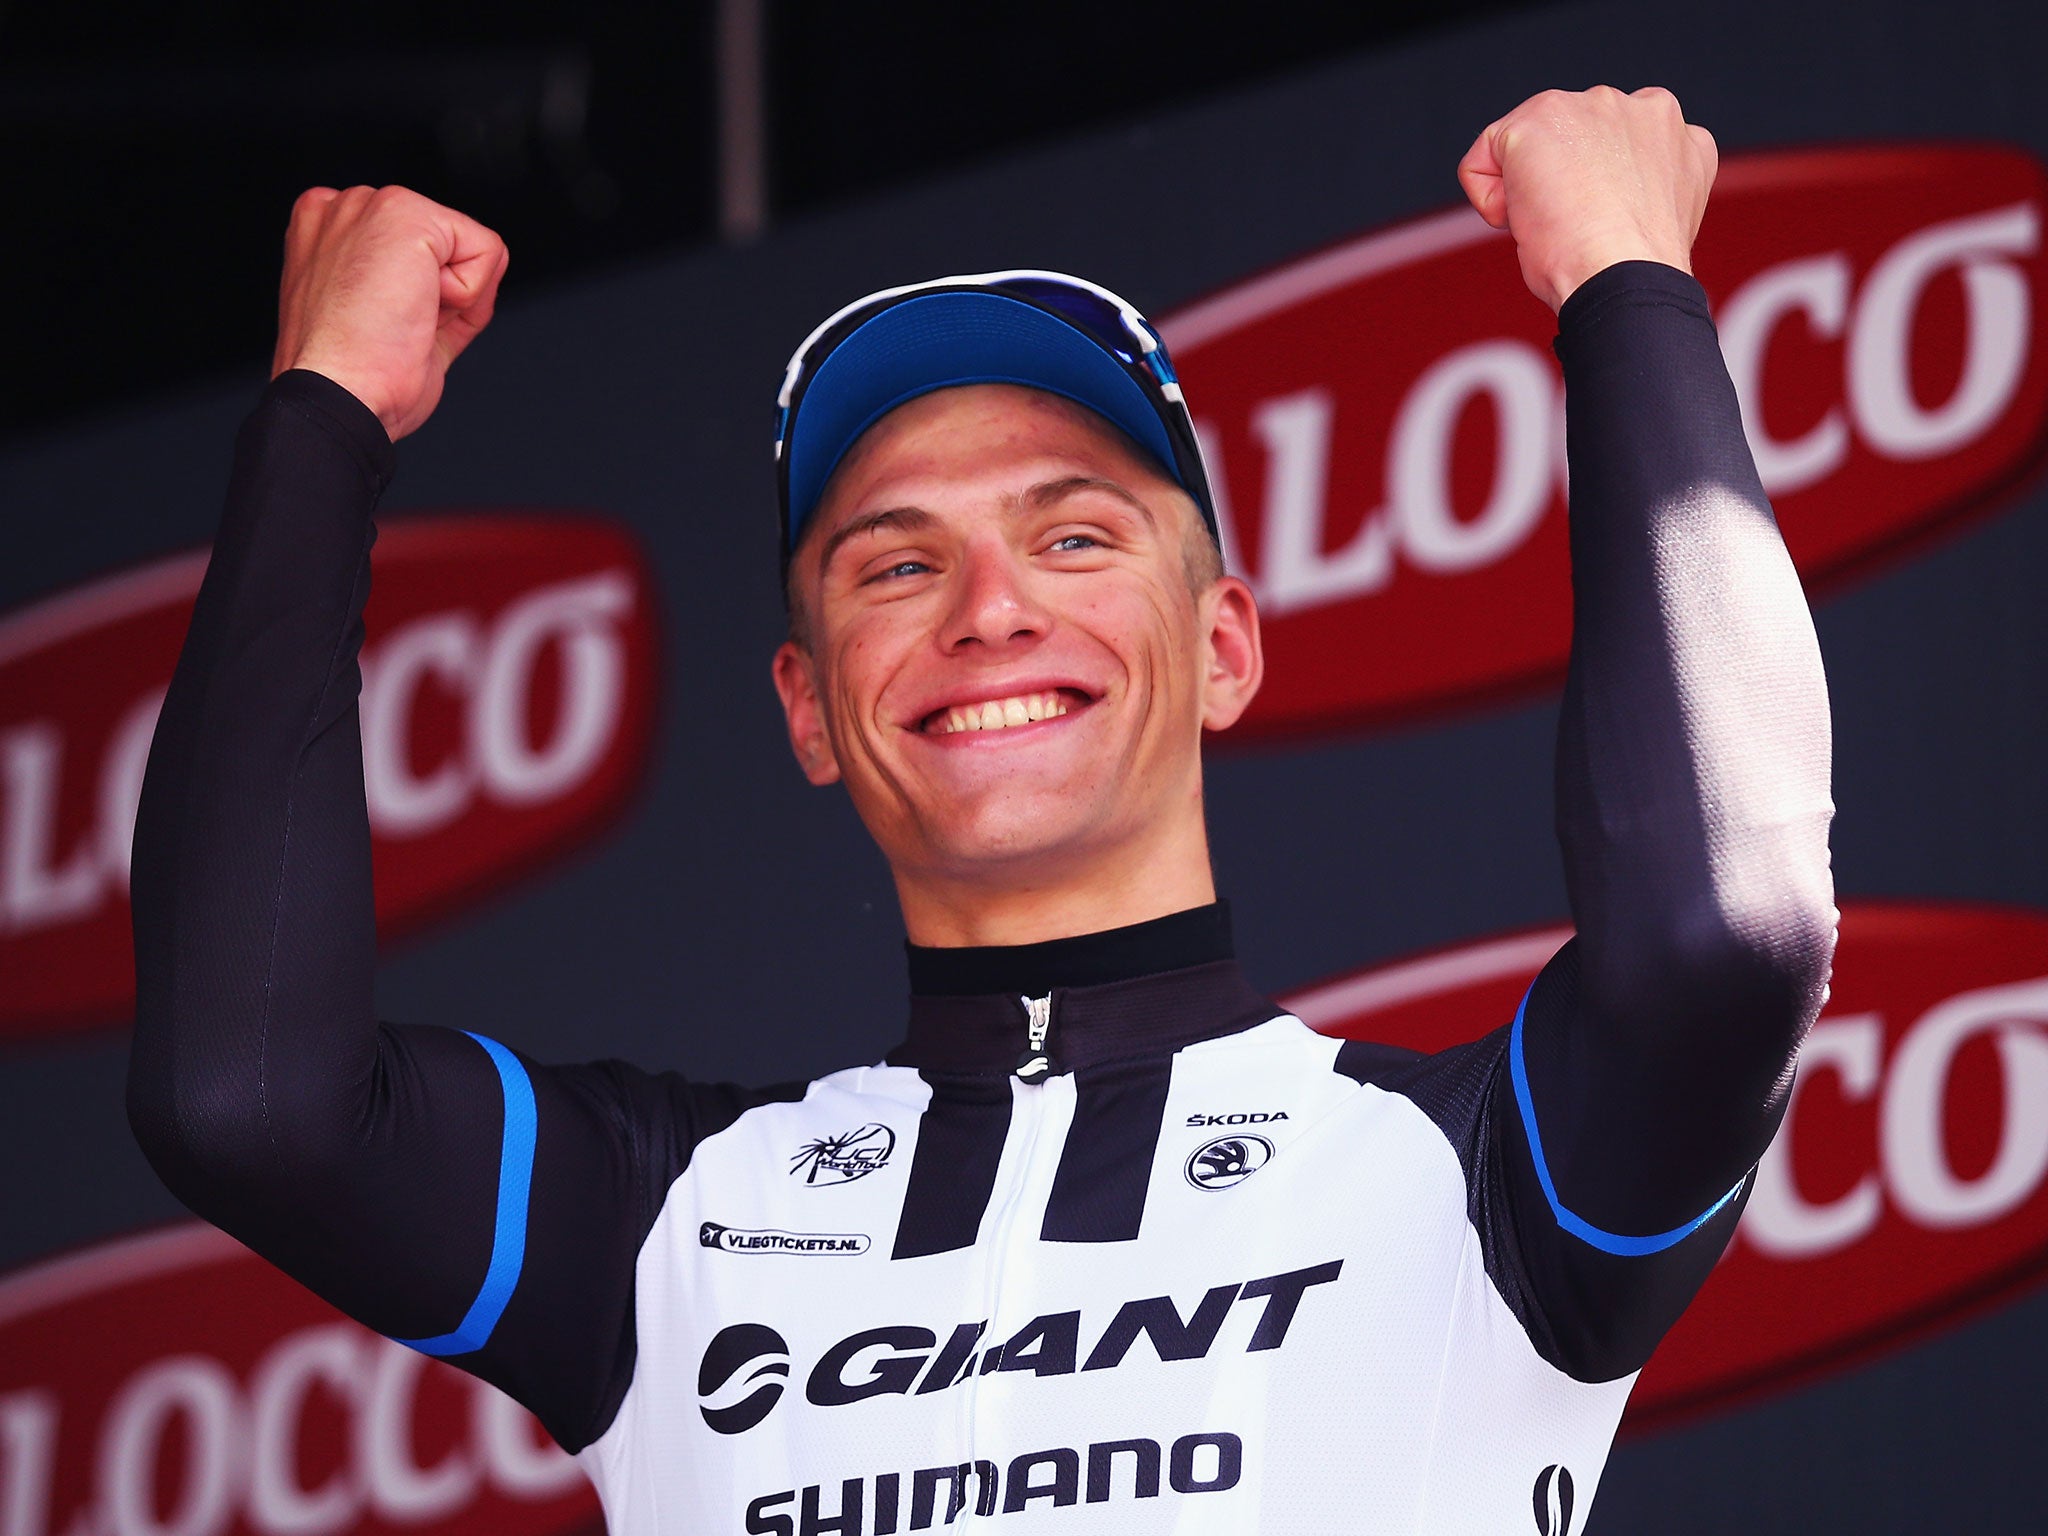 Marcel Kittel ended Mark Cavendish’s run of four consecutive Champs-Elysées victories last year